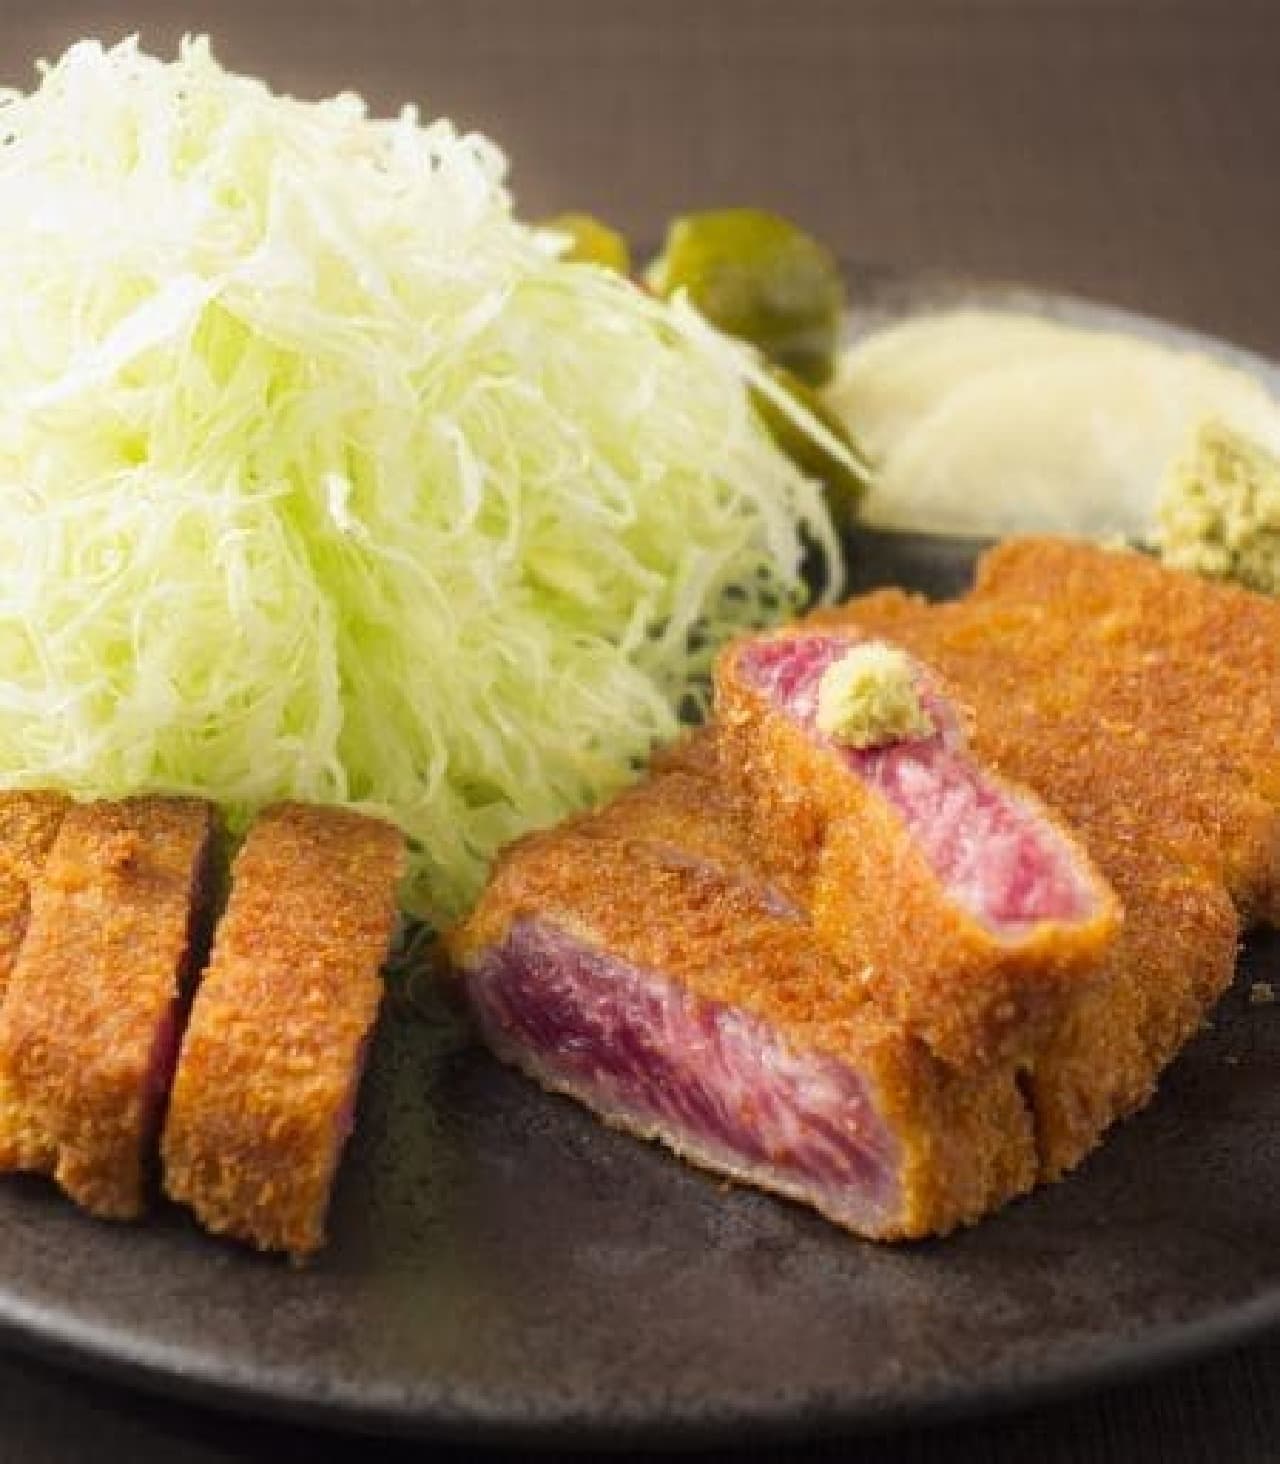 Beef cutlet specialty store "Kyoto Katsushi" from Kyoto has entered Tokyo!